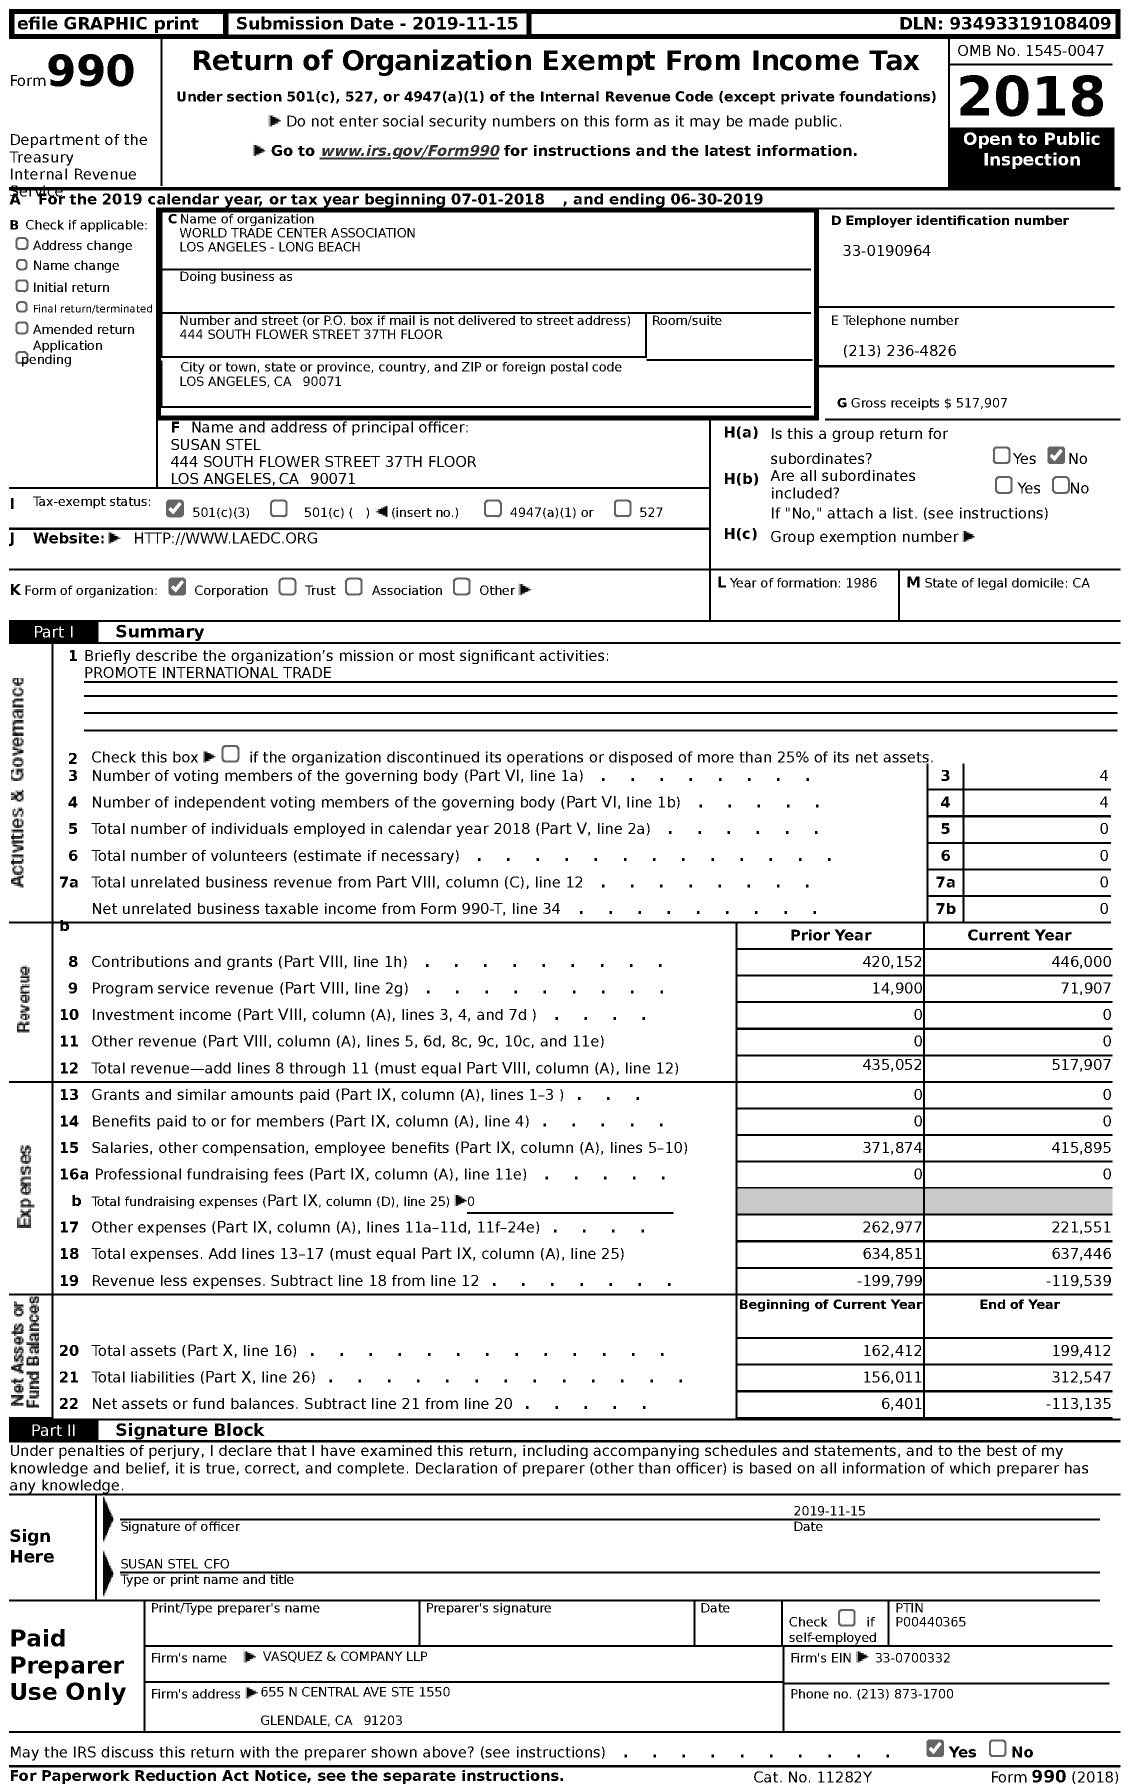 Image of first page of 2018 Form 990 for World Trade Center Association Los Angeles - Long Beach